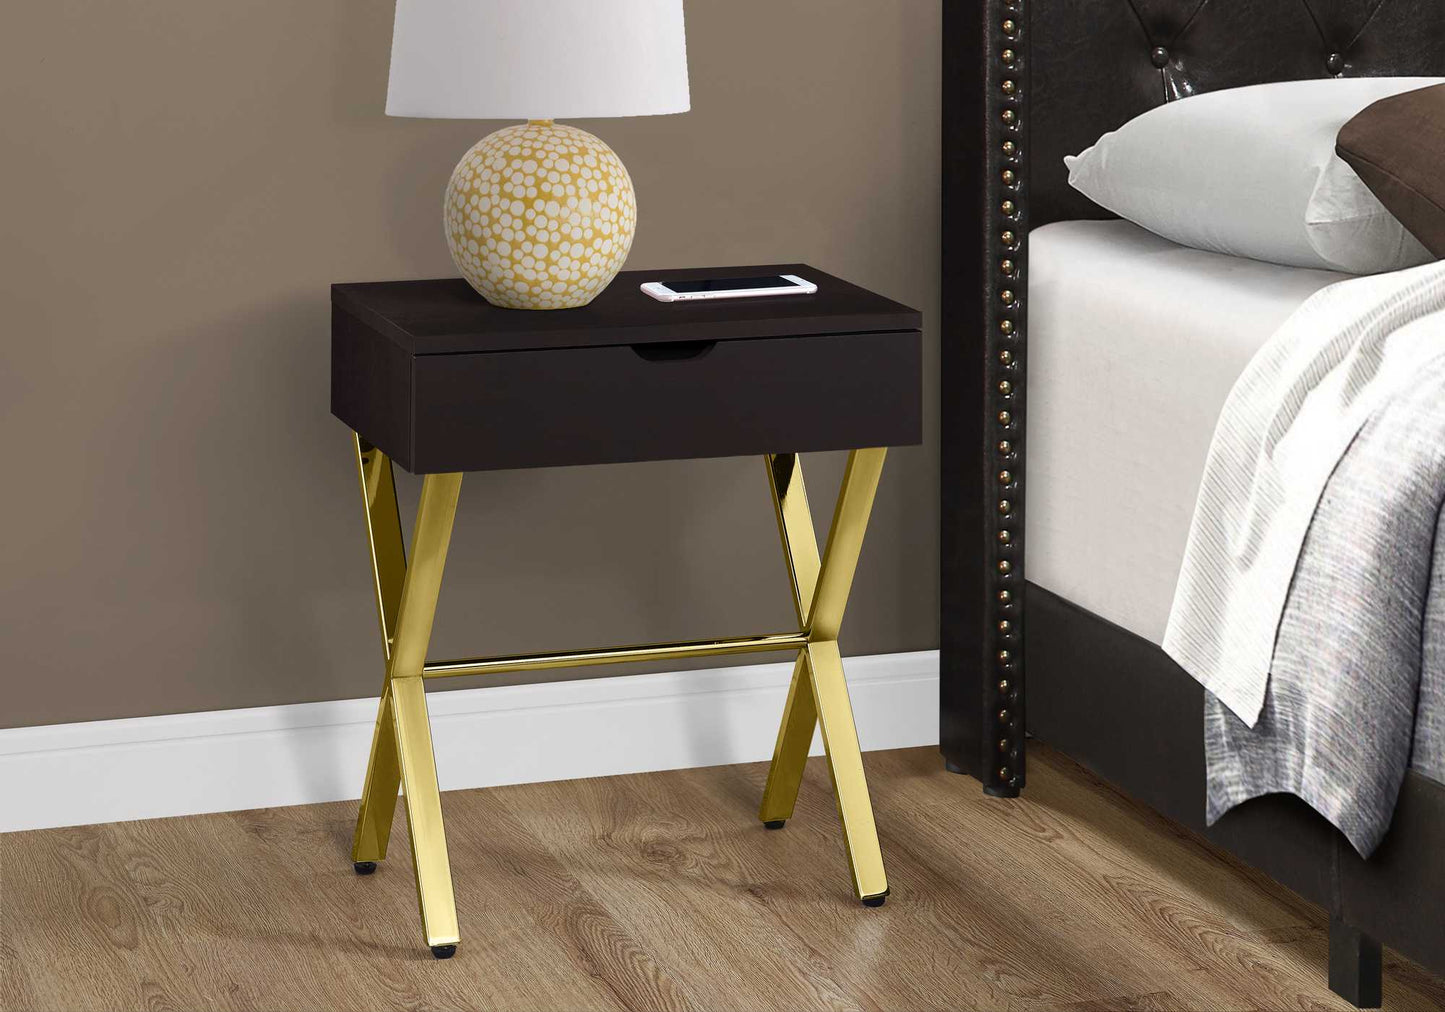 22" Gold And Dark Brown End Table With Drawer